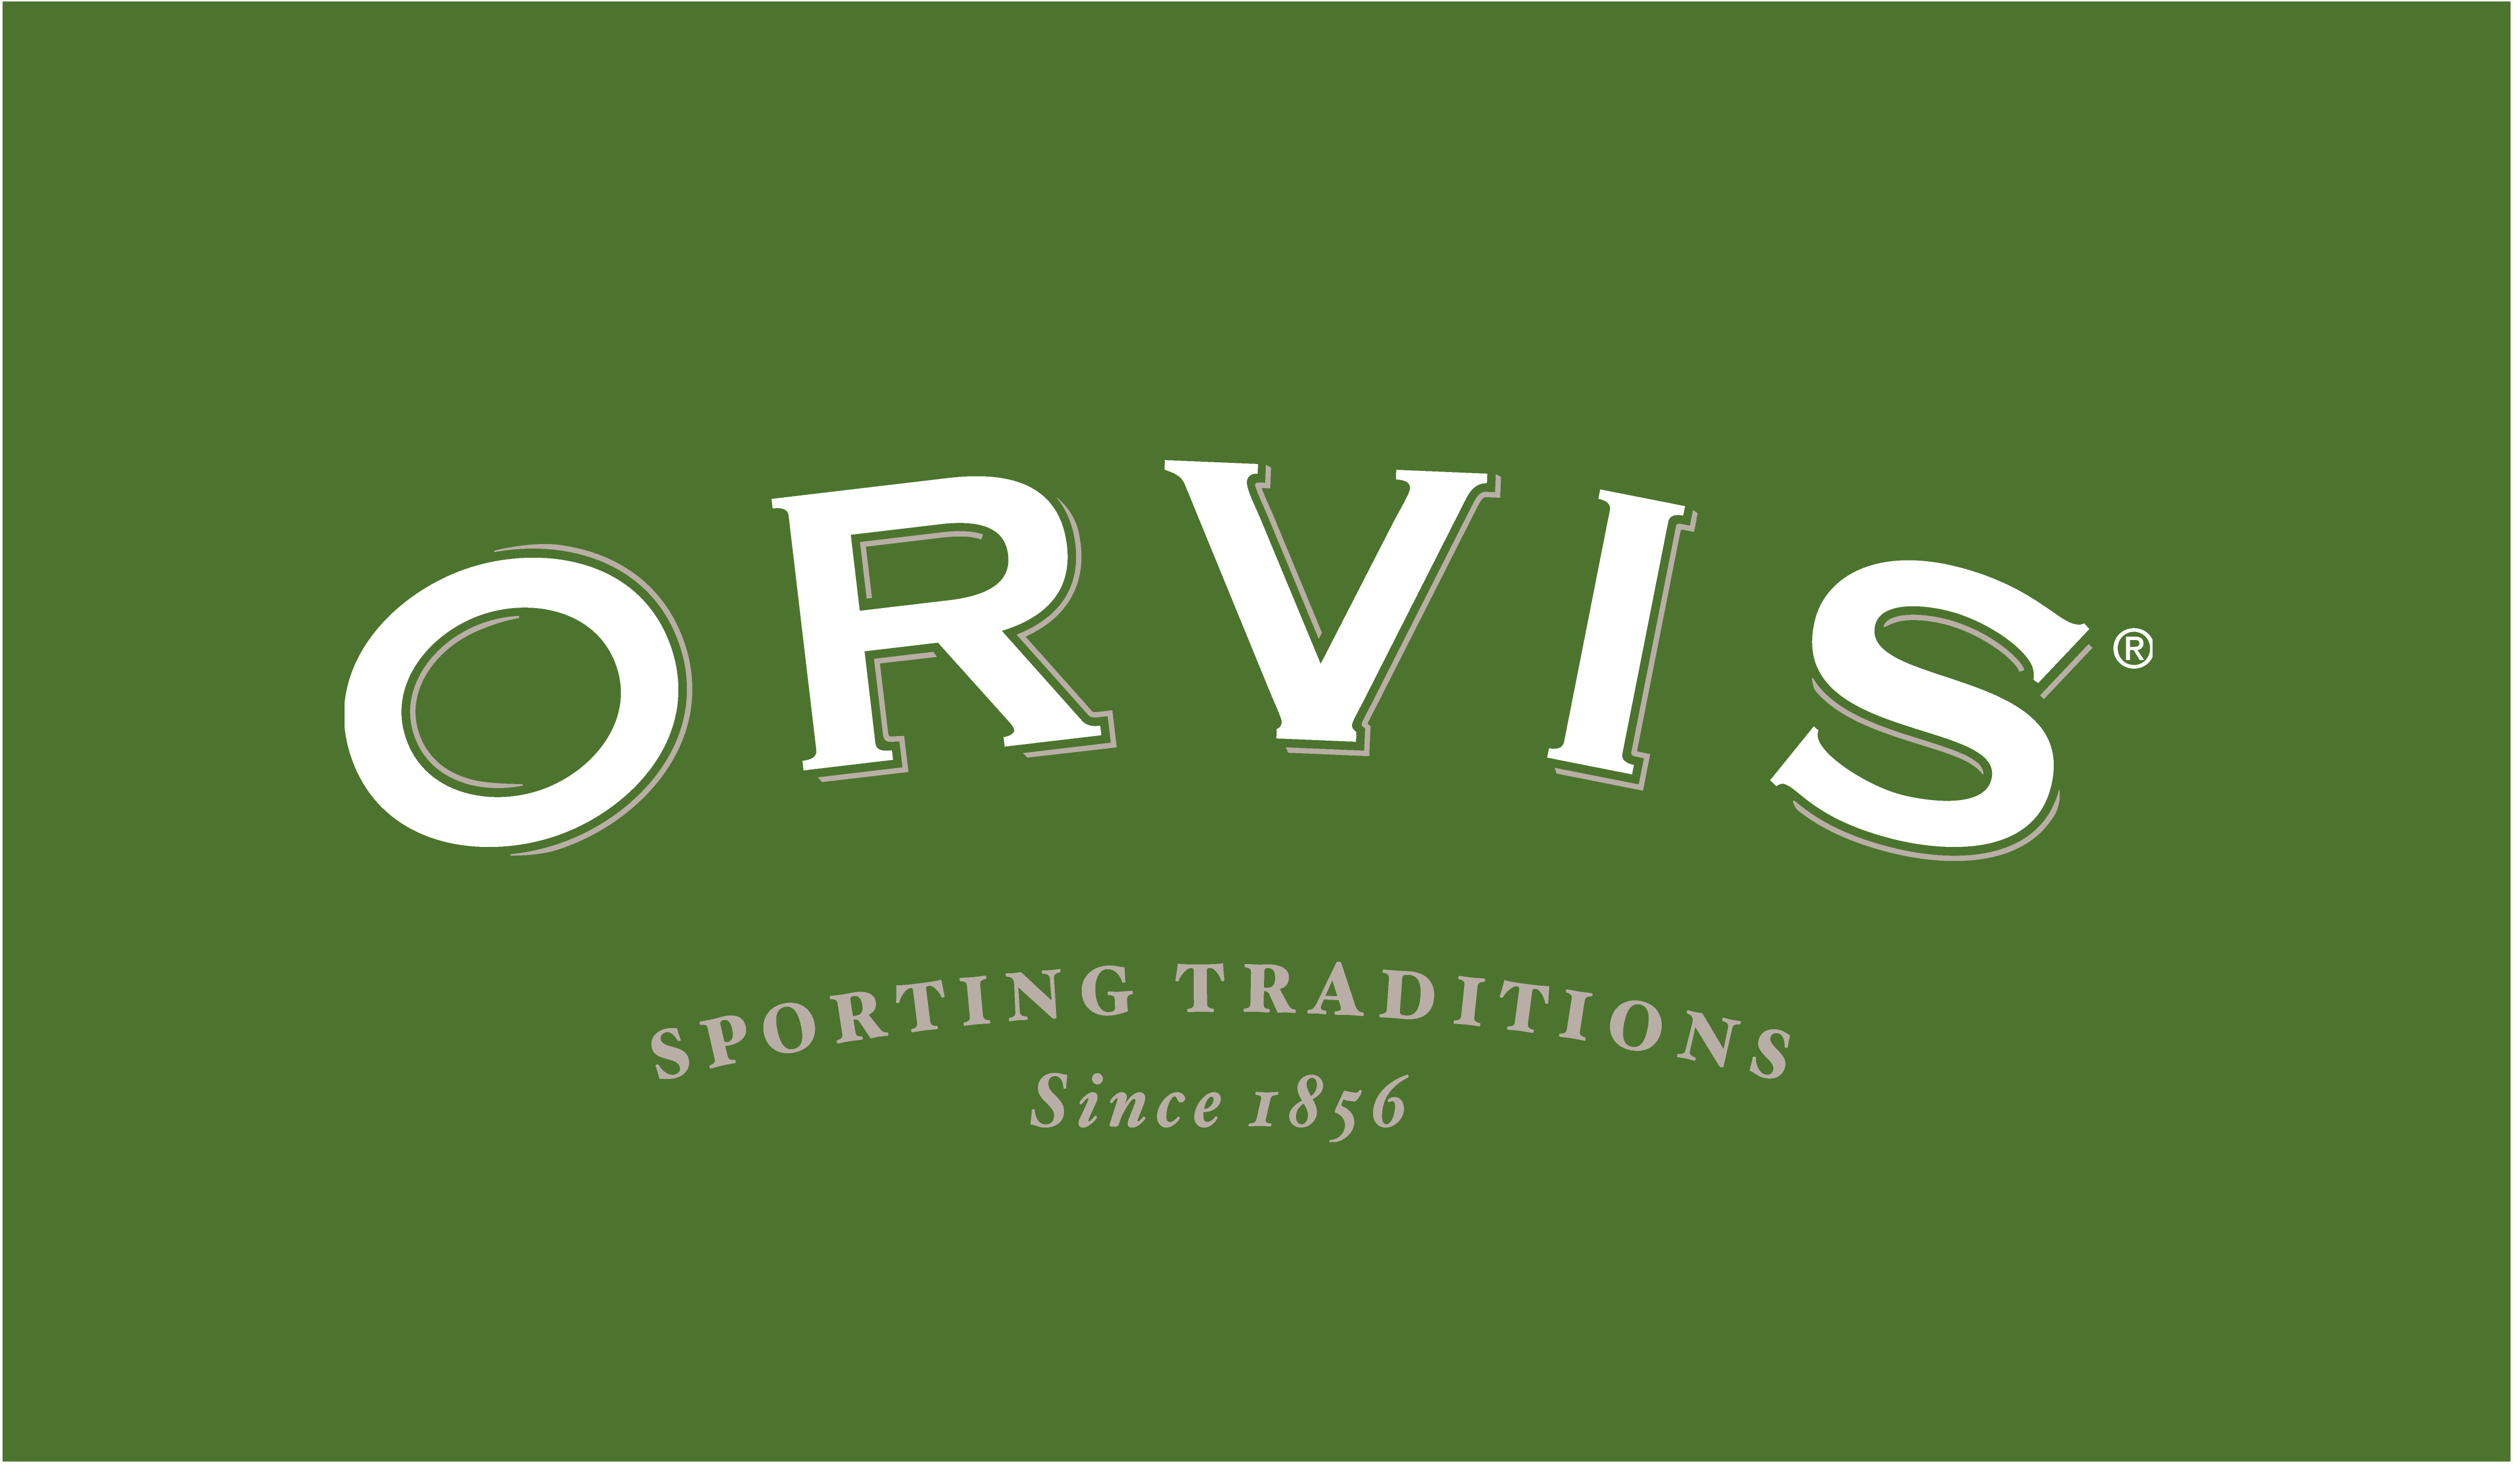 Orvis Coupons 